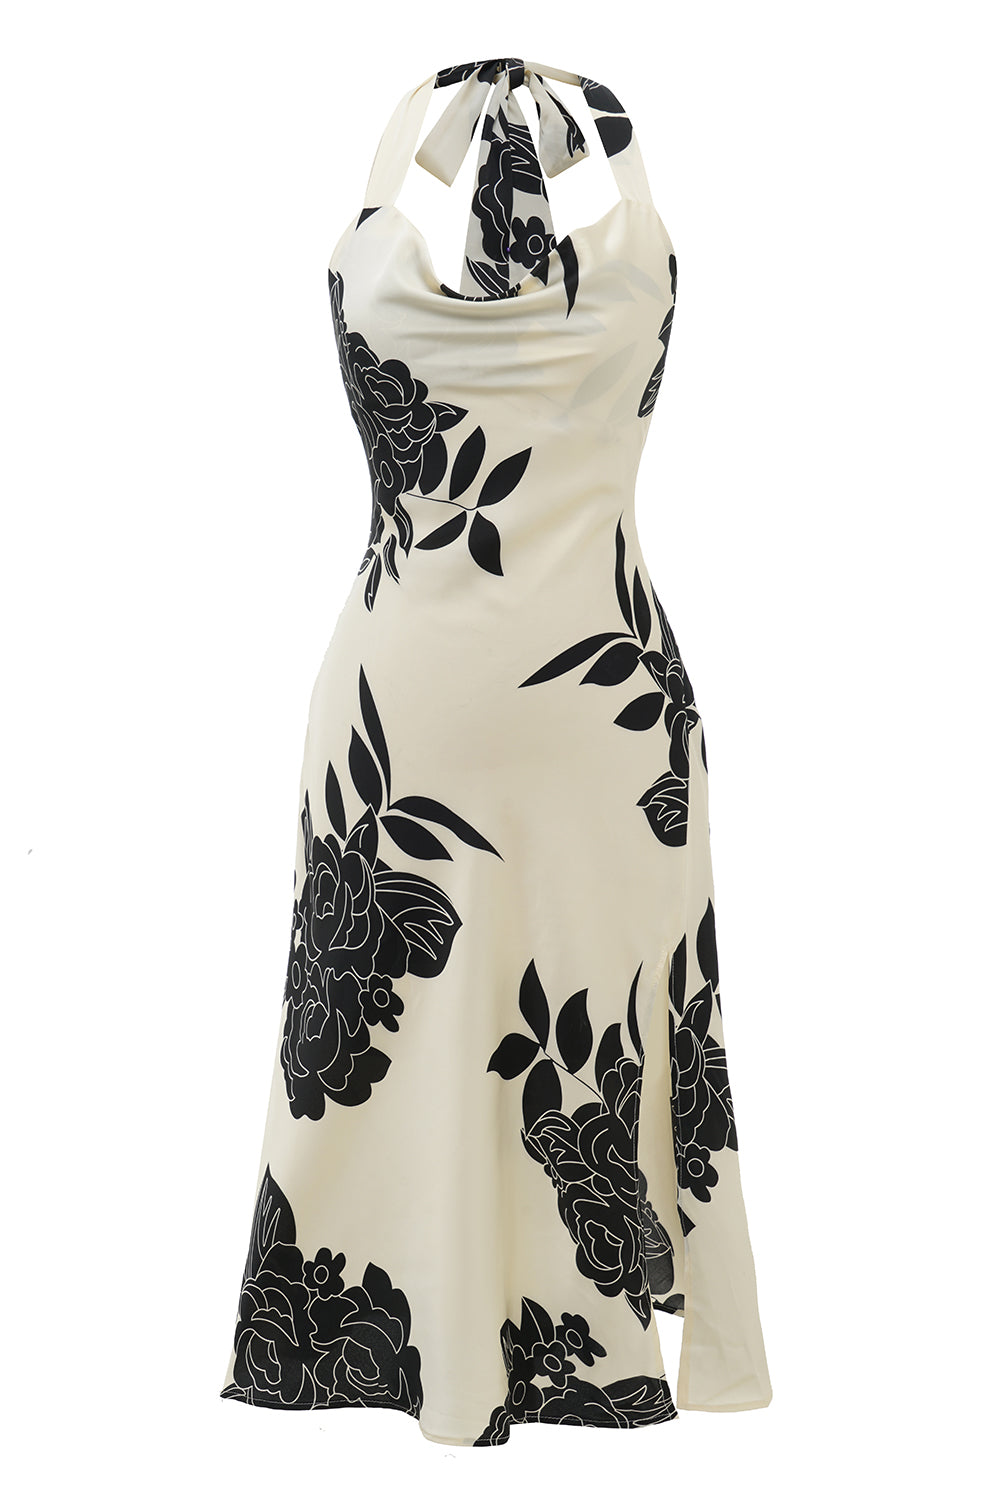 Black and White Floral Wedding Party Dress